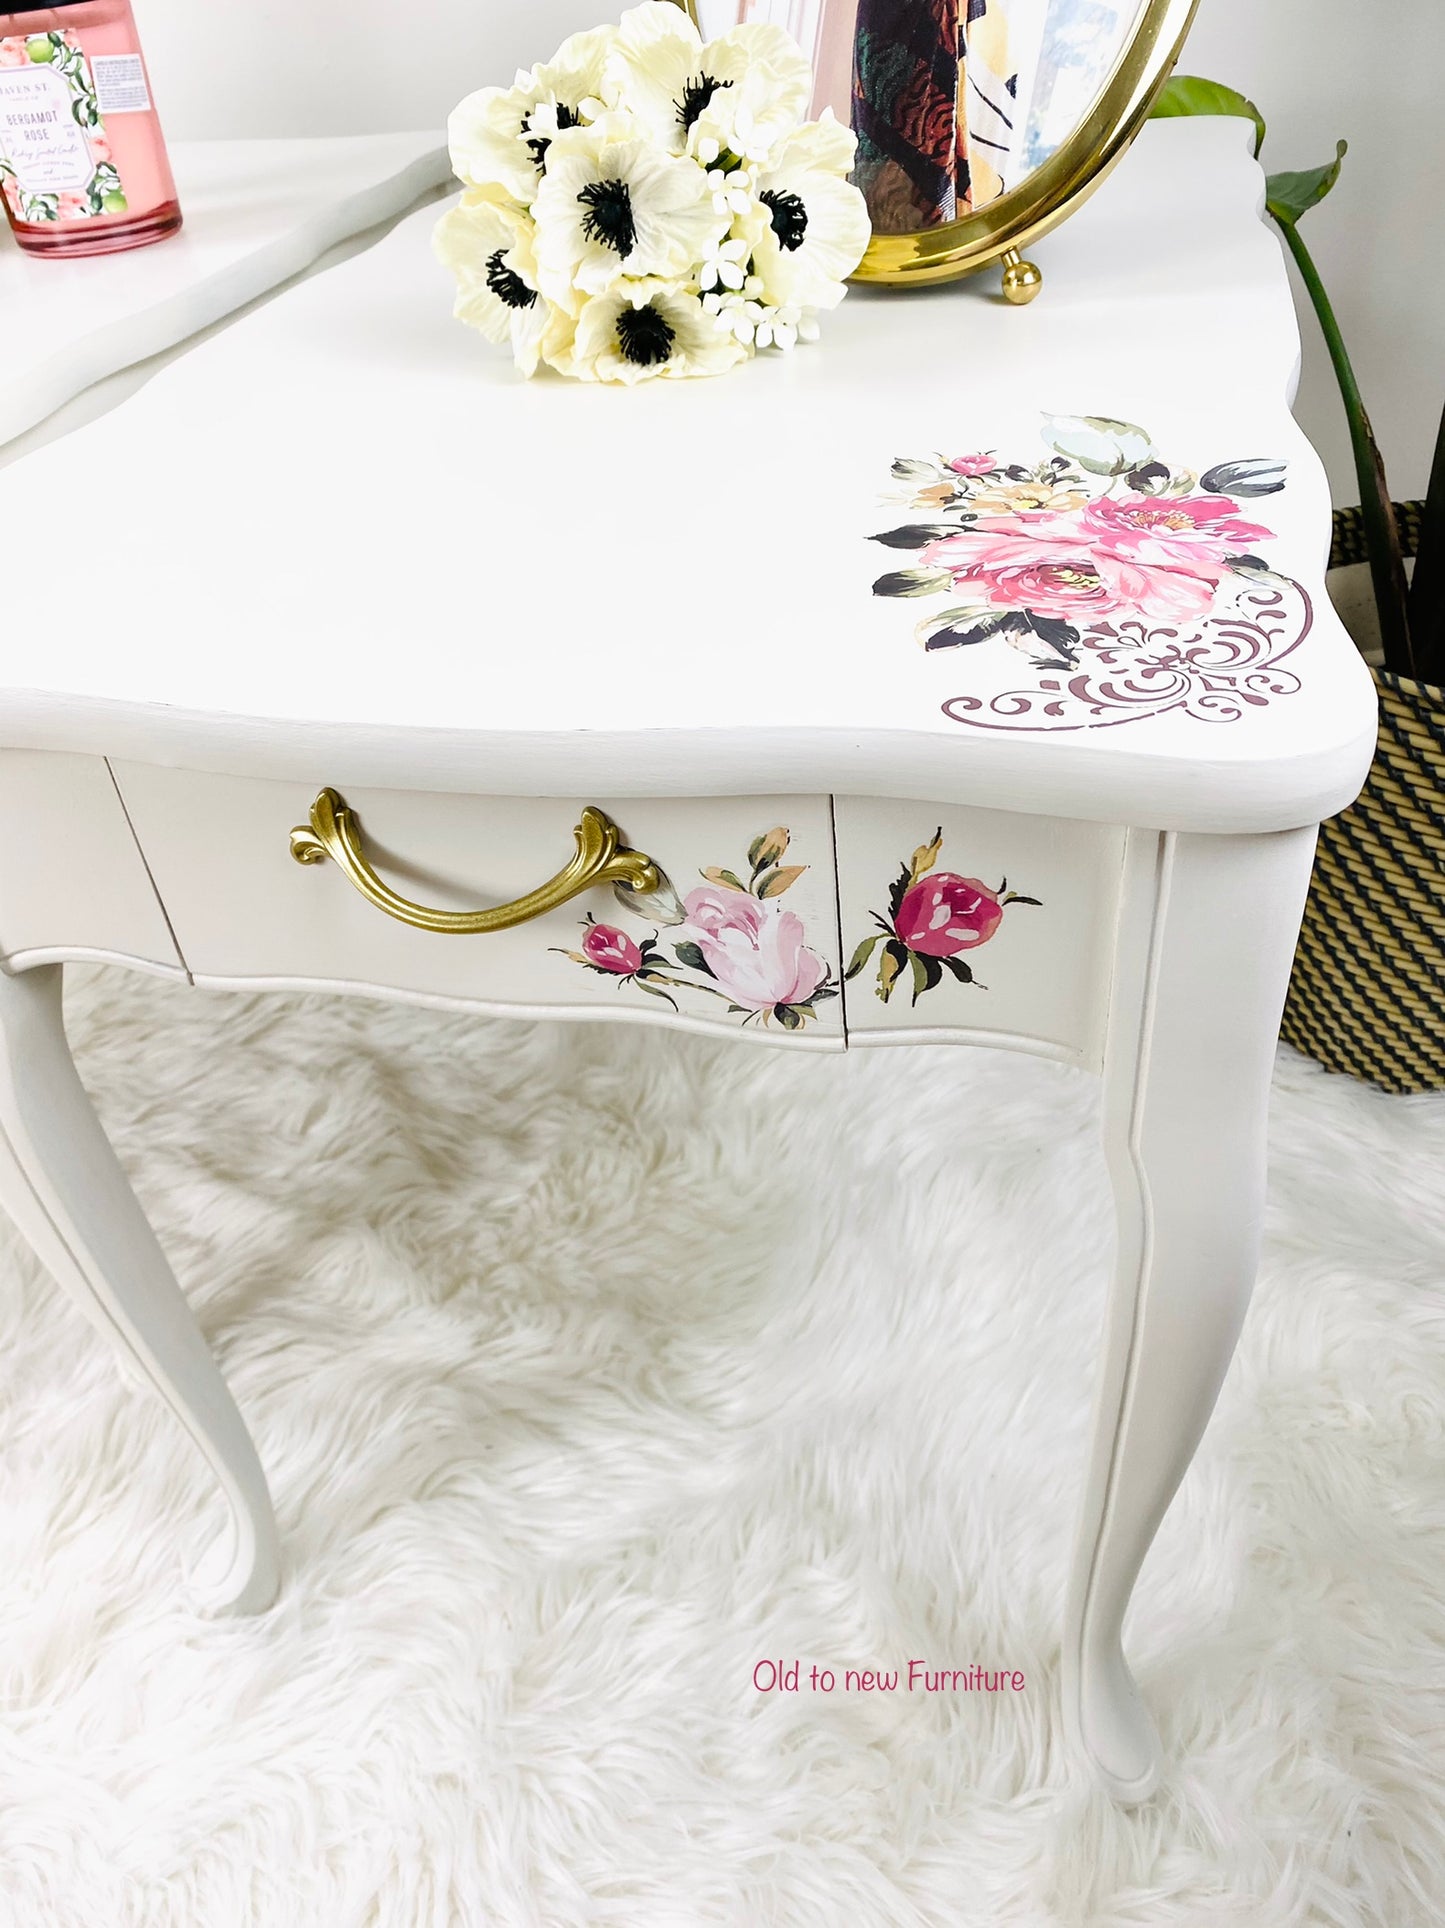 Antique white side tables elegant and uniquely beautiful painted a warm white color at oldtonewefurniture.ca